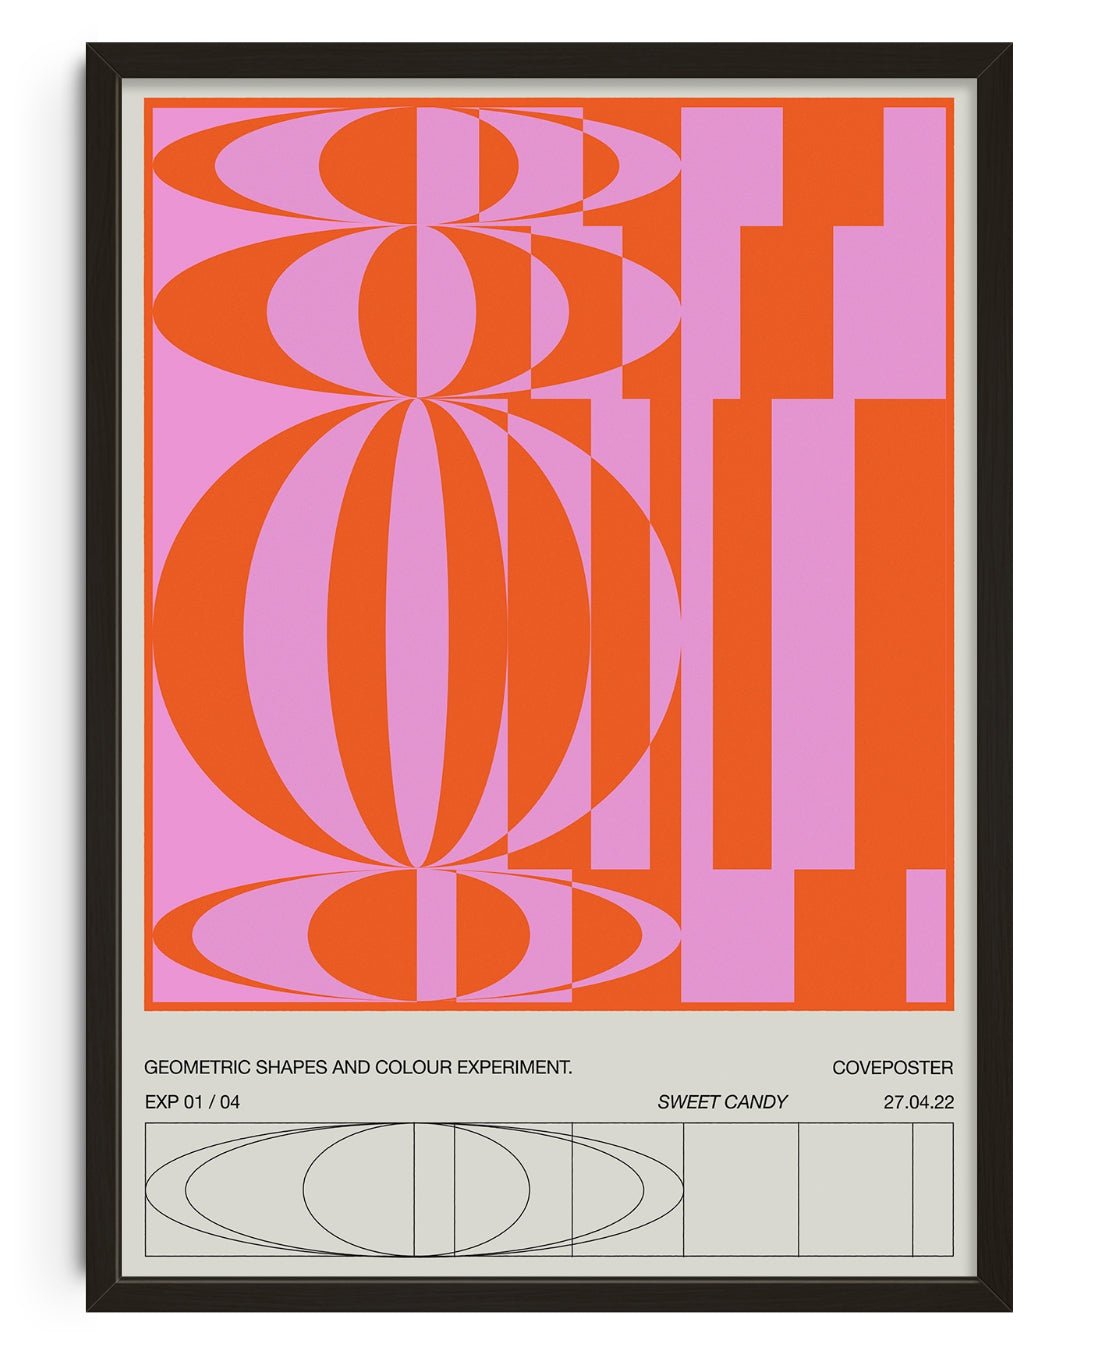 Geometric Sweet Candy contemporary wall art print by Coveposter - sold by DROOL